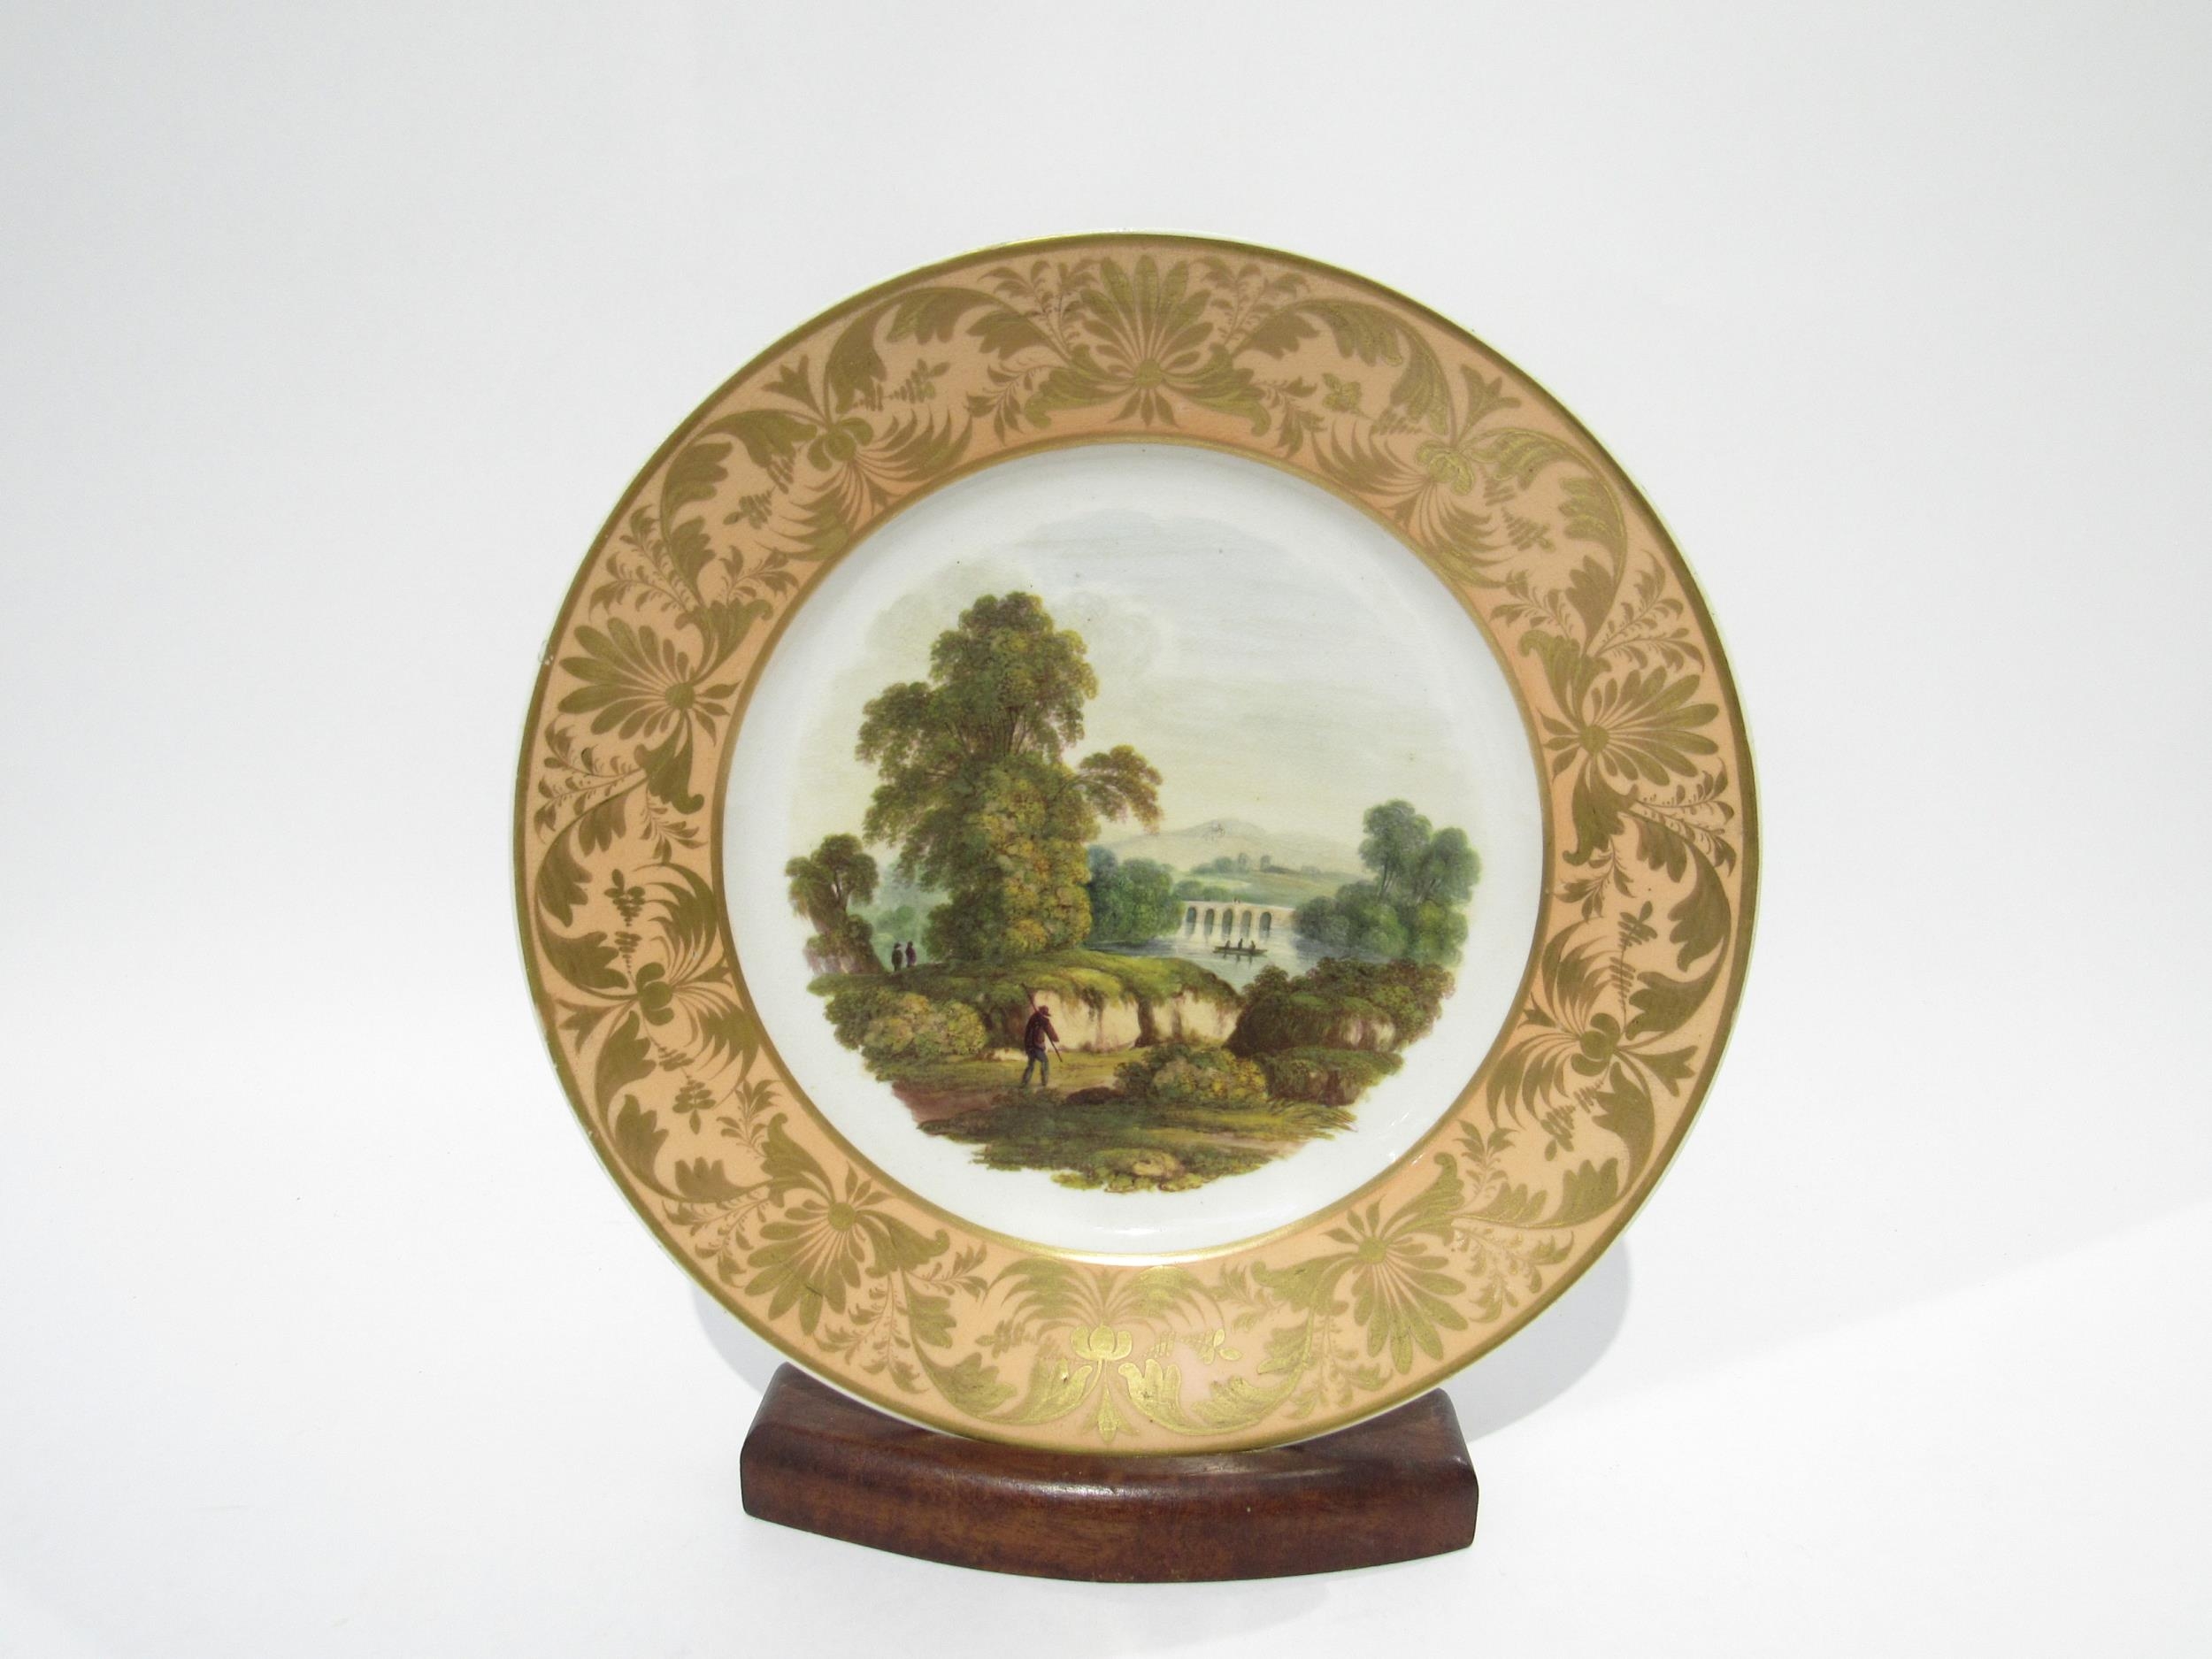 Attributed to George Robertson a 19th Century Derby porcelain plate inscribed verso "On the River - Image 2 of 10